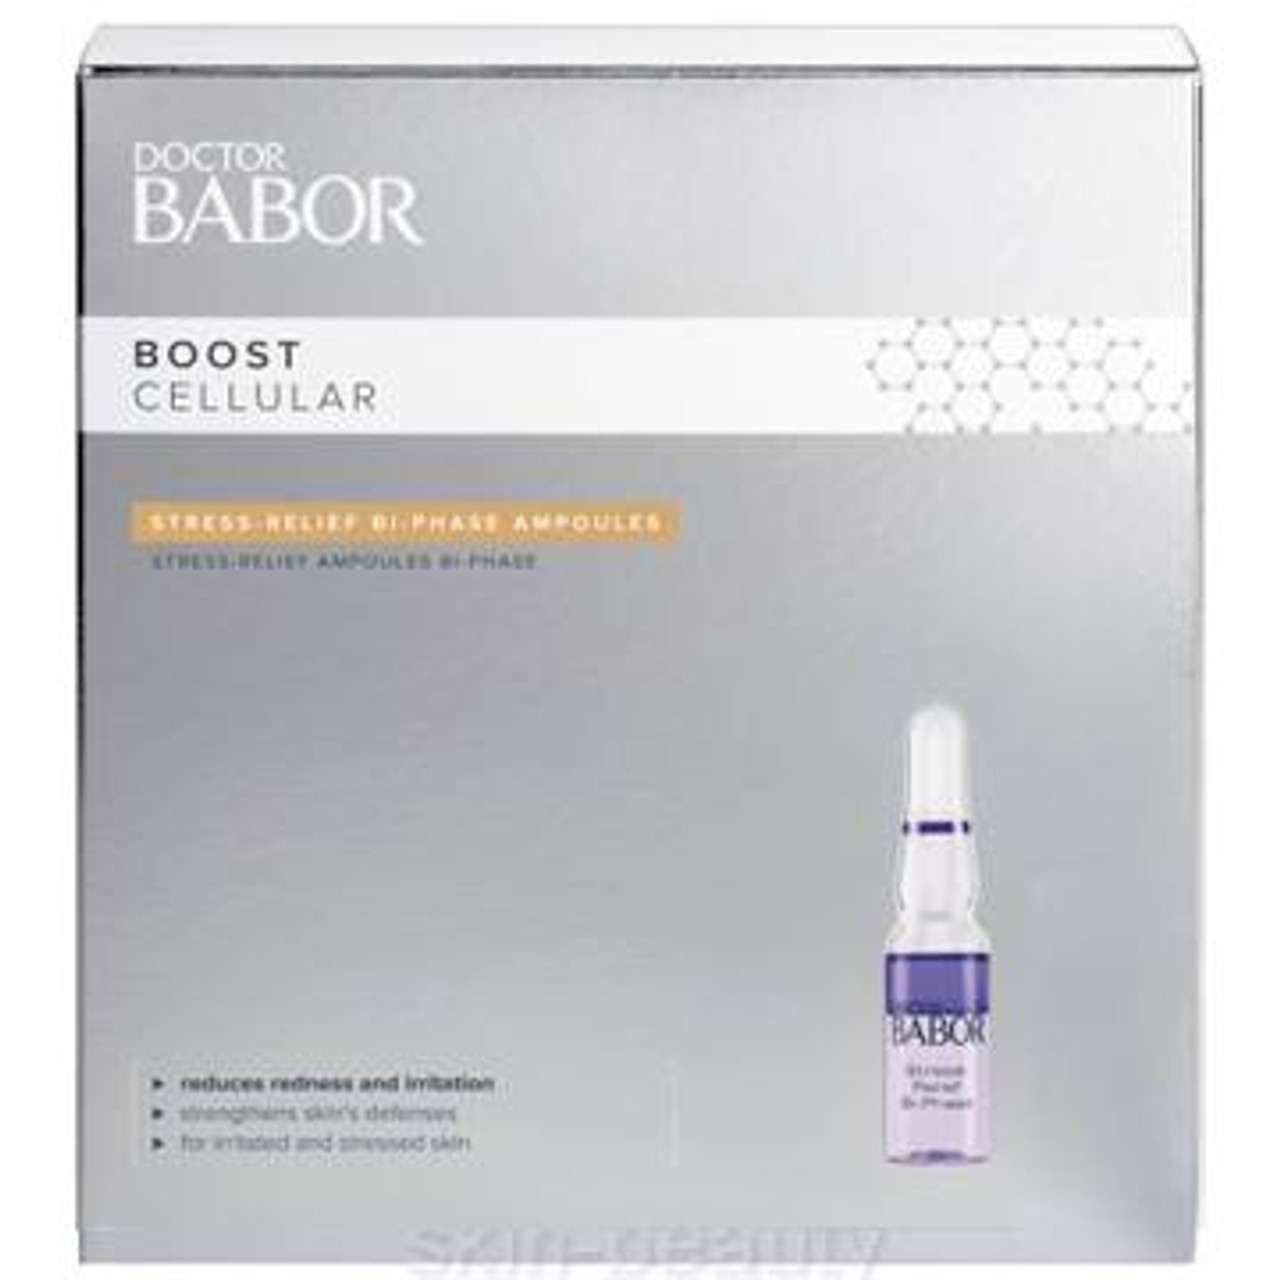 Doctor Babor Boost Cellular Stress Relief Bi-phase Ampoules - 14 x 1 ml